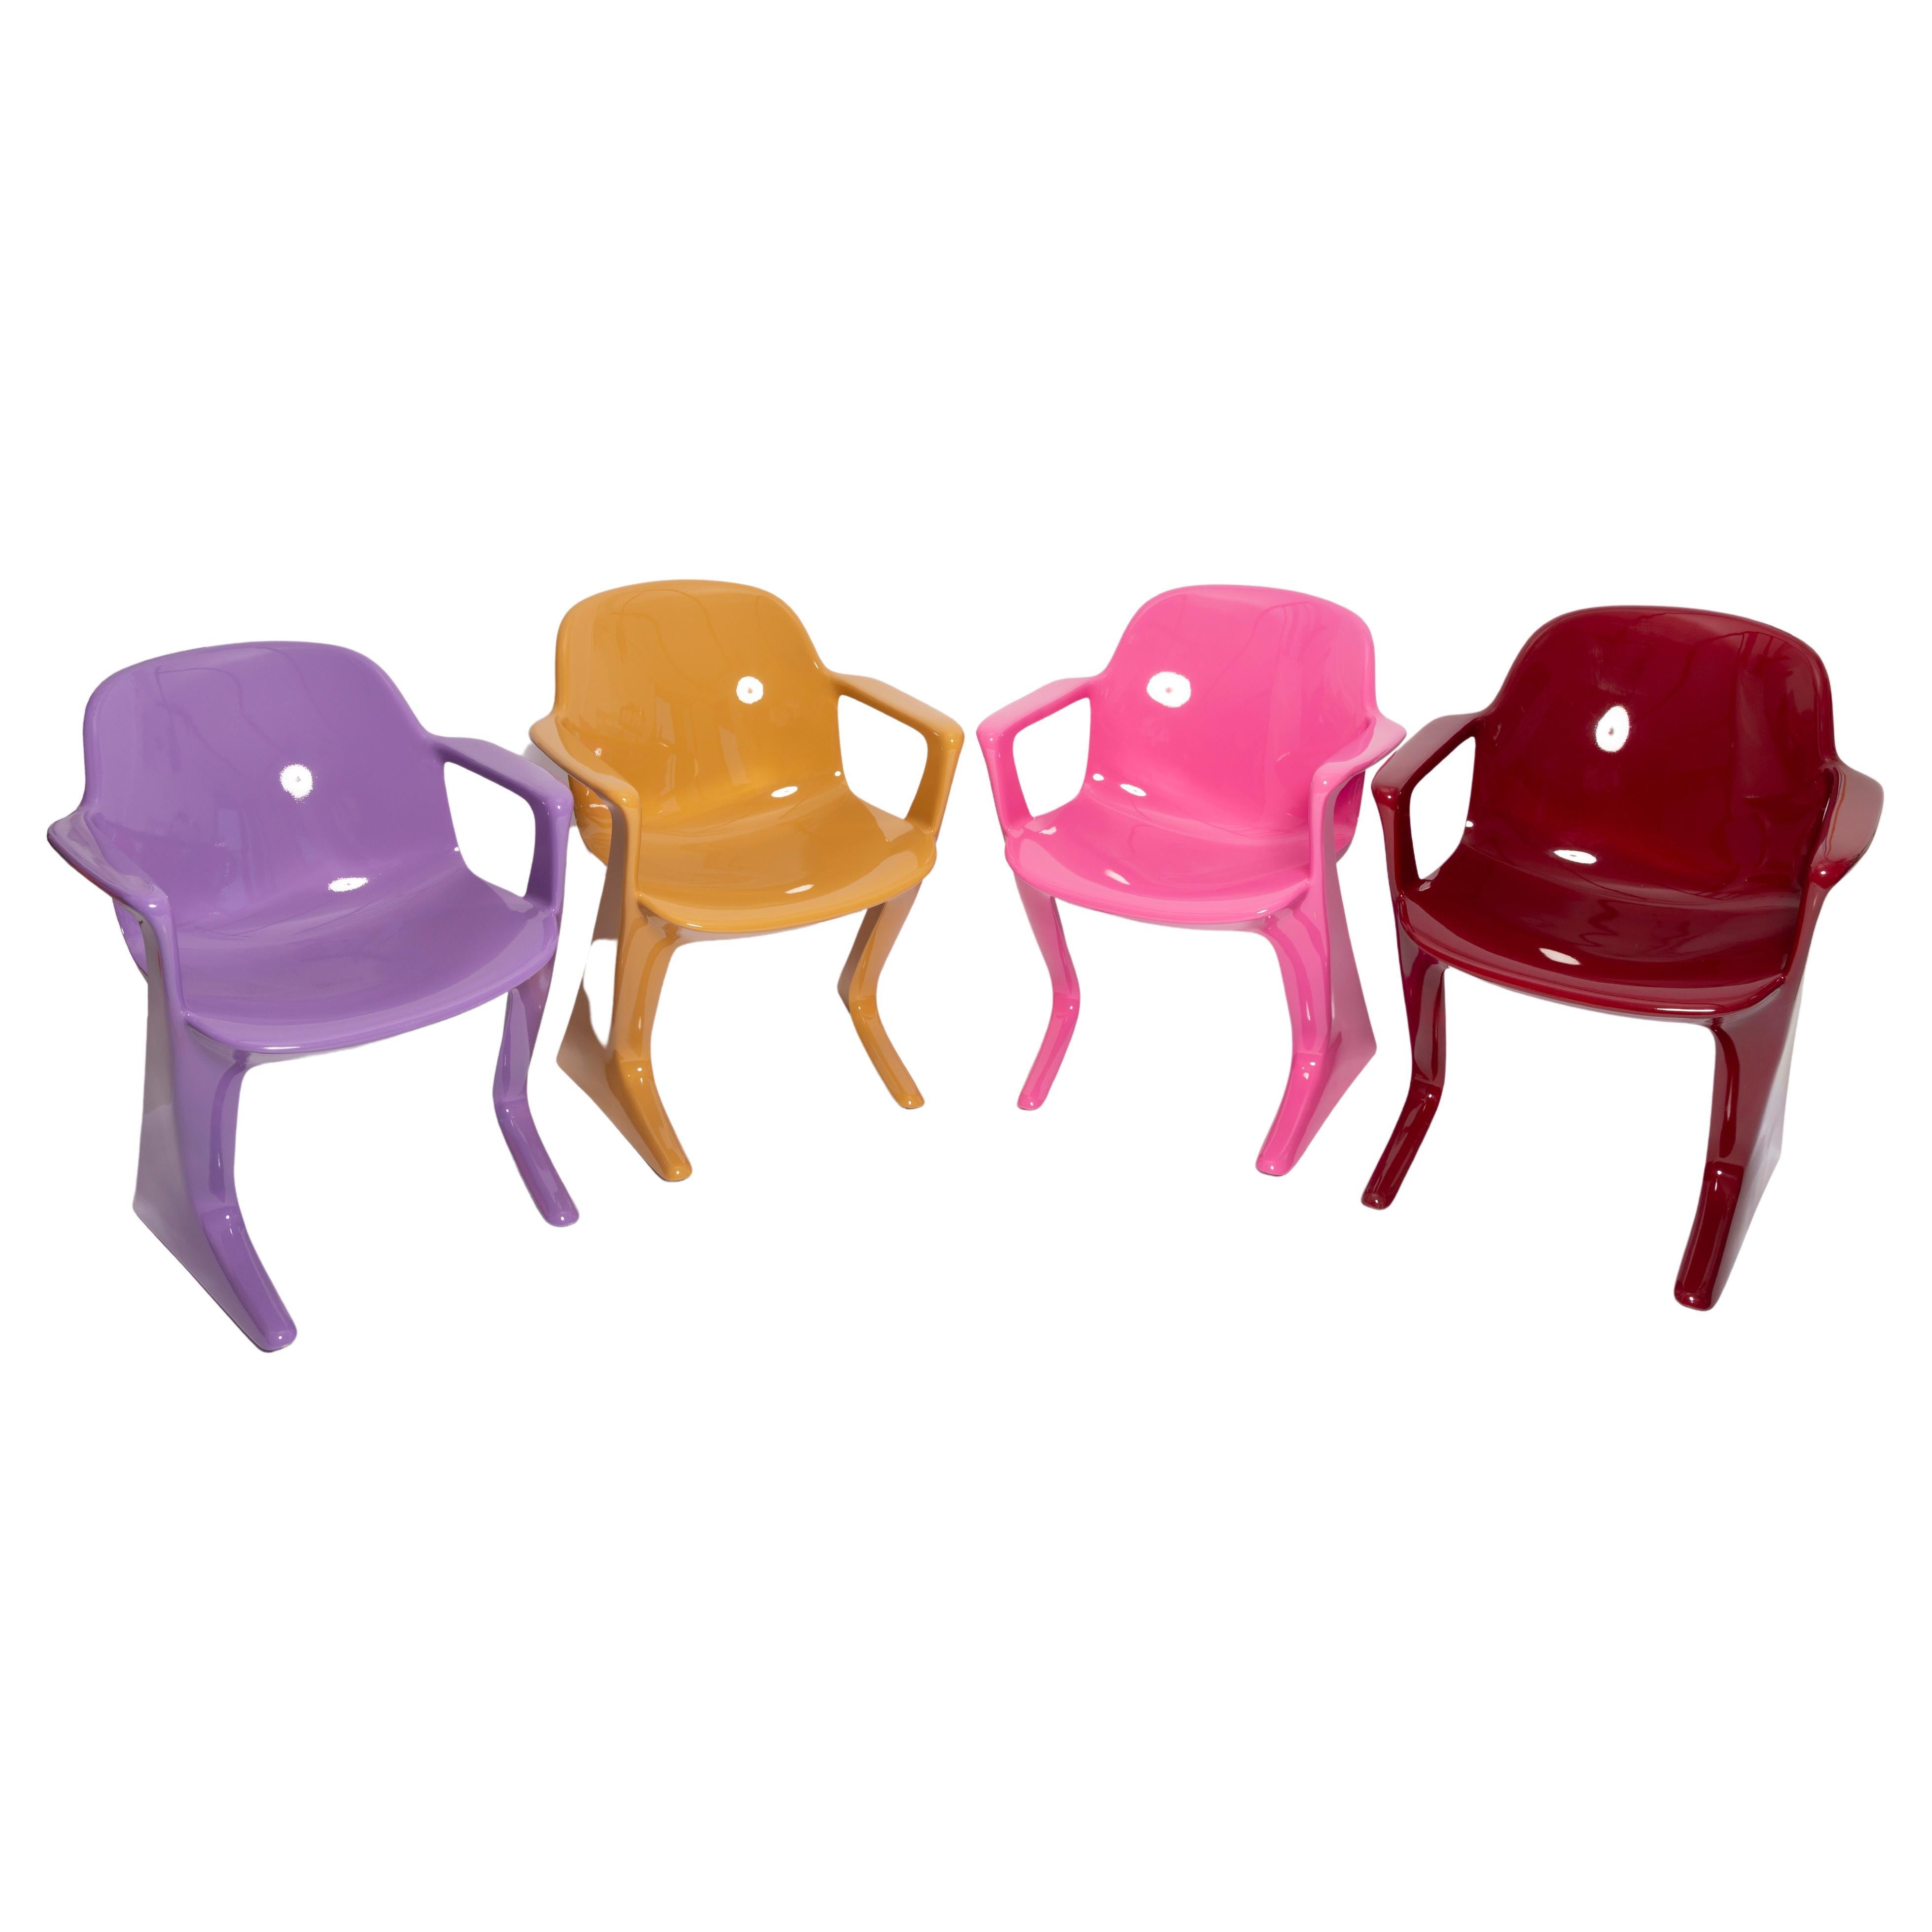 Set of Four Sand Pink Purple and Red Kangaroo Chairs, Ernst Moeckl, Germany 1960